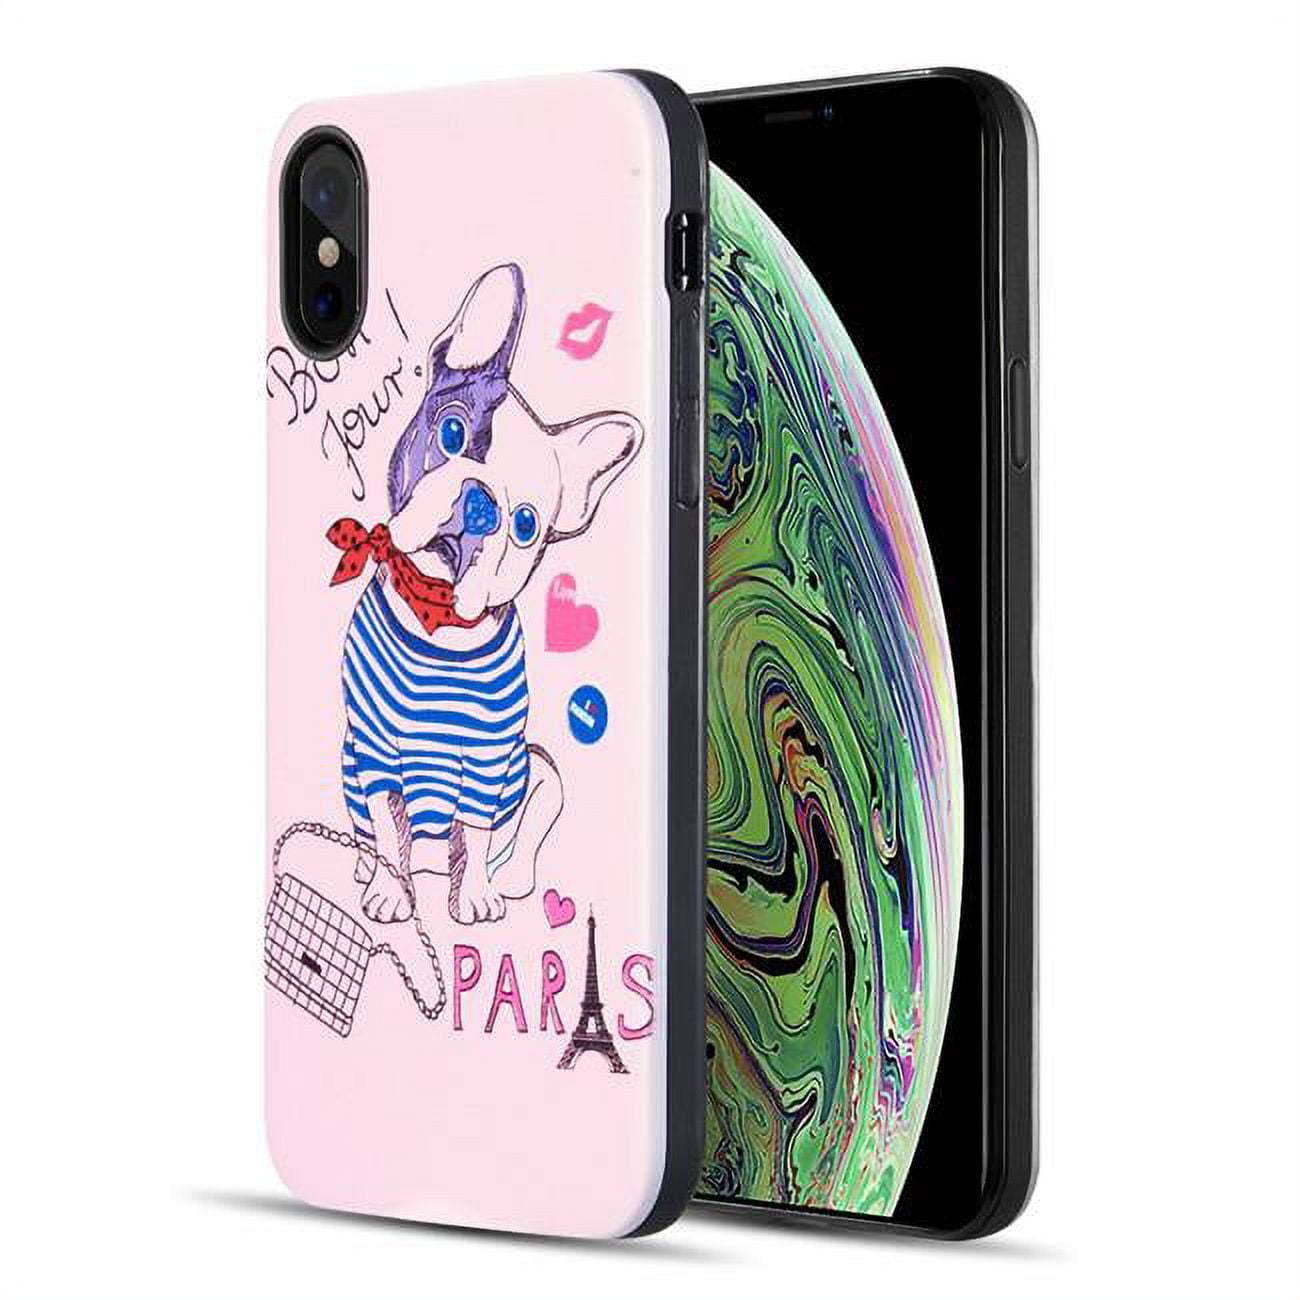 TCAIPXS-ARTP-042 The Art Pop Series 3D Embossed Printing Hybrid Case for iPhone XS & X - Design 042 -  Dream Wireless